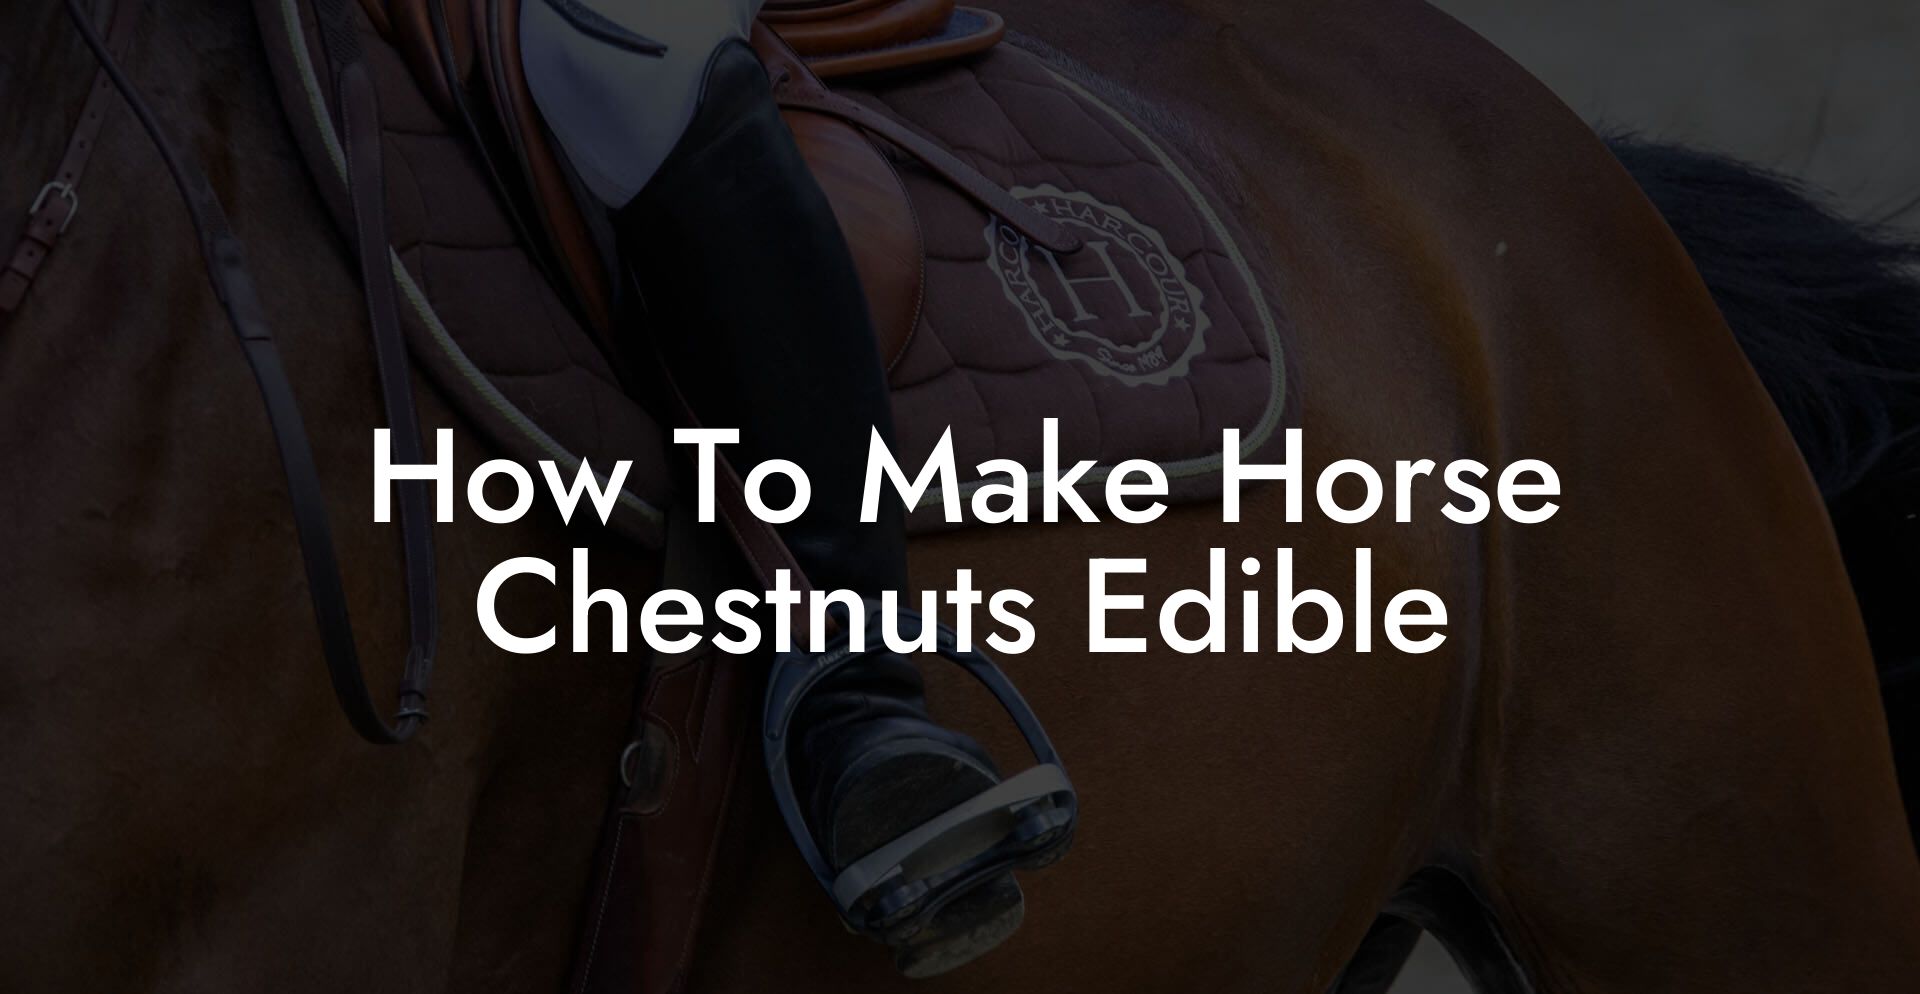 How To Make Horse Chestnuts Edible